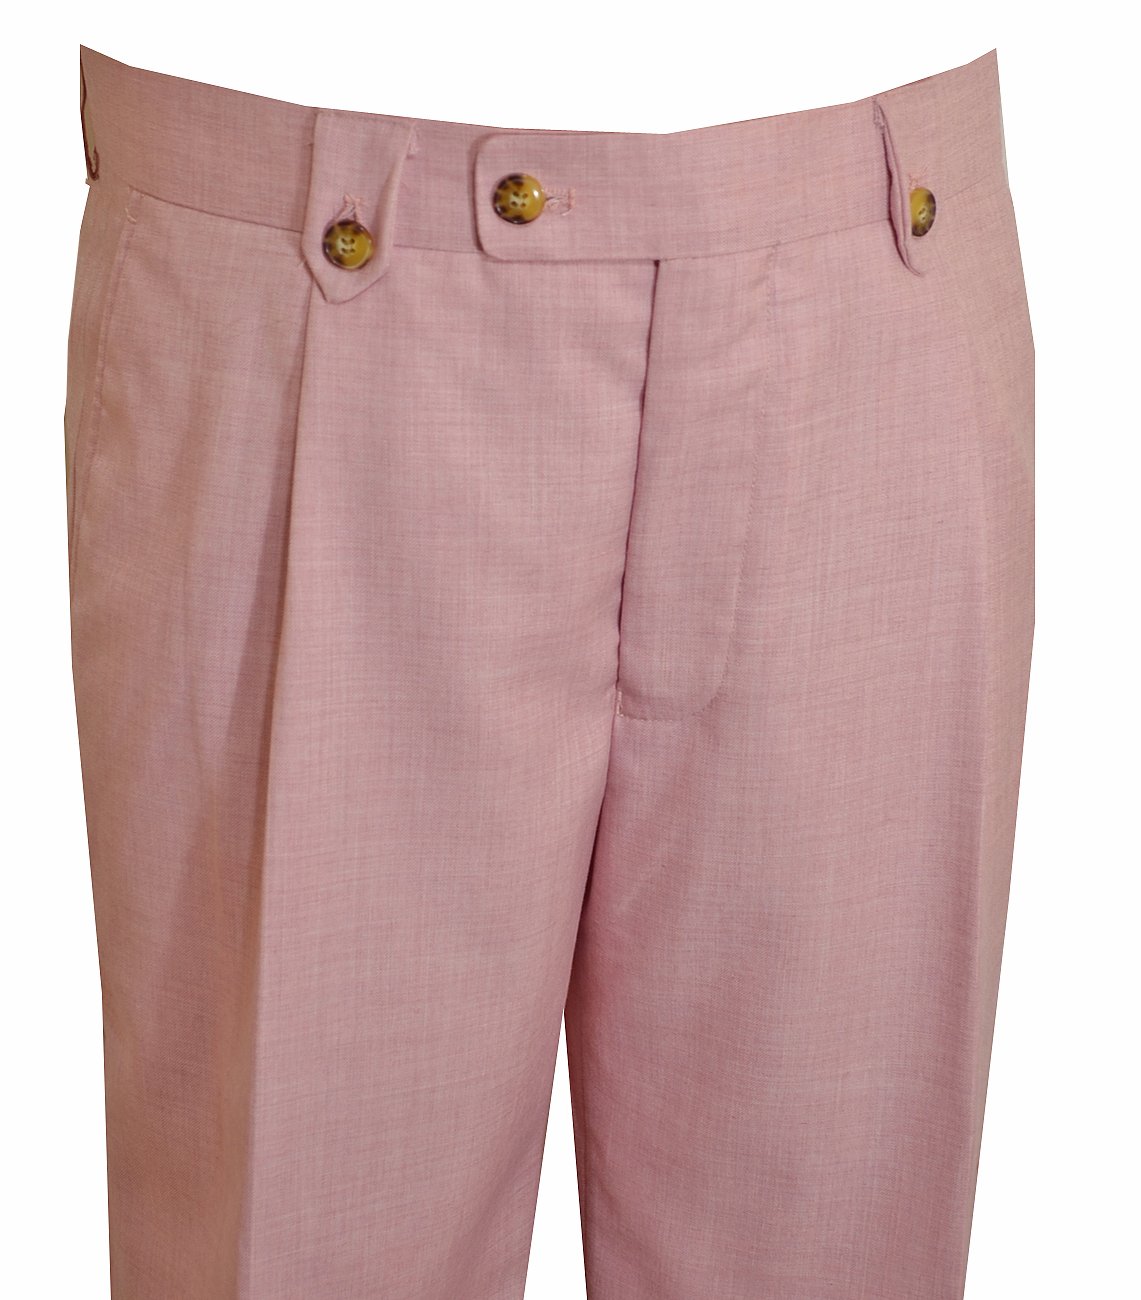 light pink pant for suit